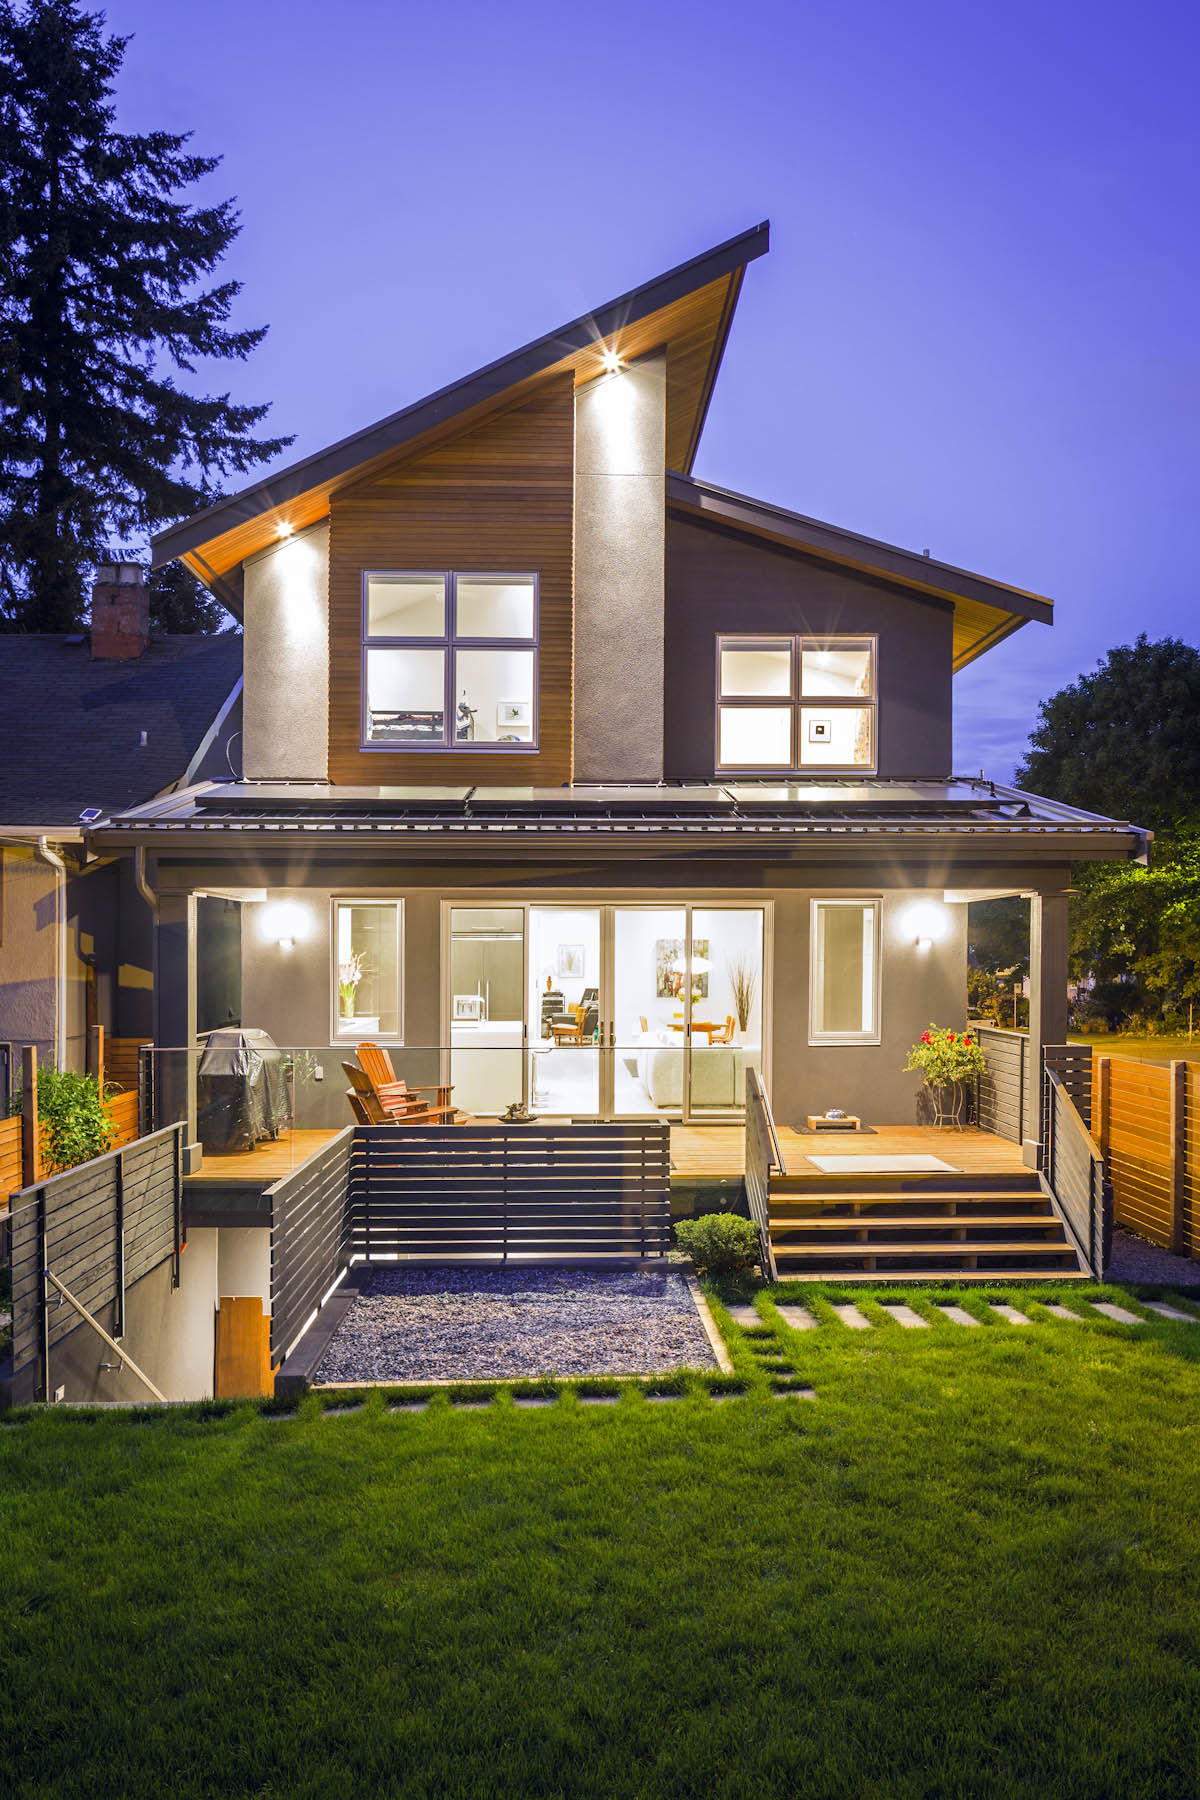 Back view of the modern home design at Cambie Corridor.